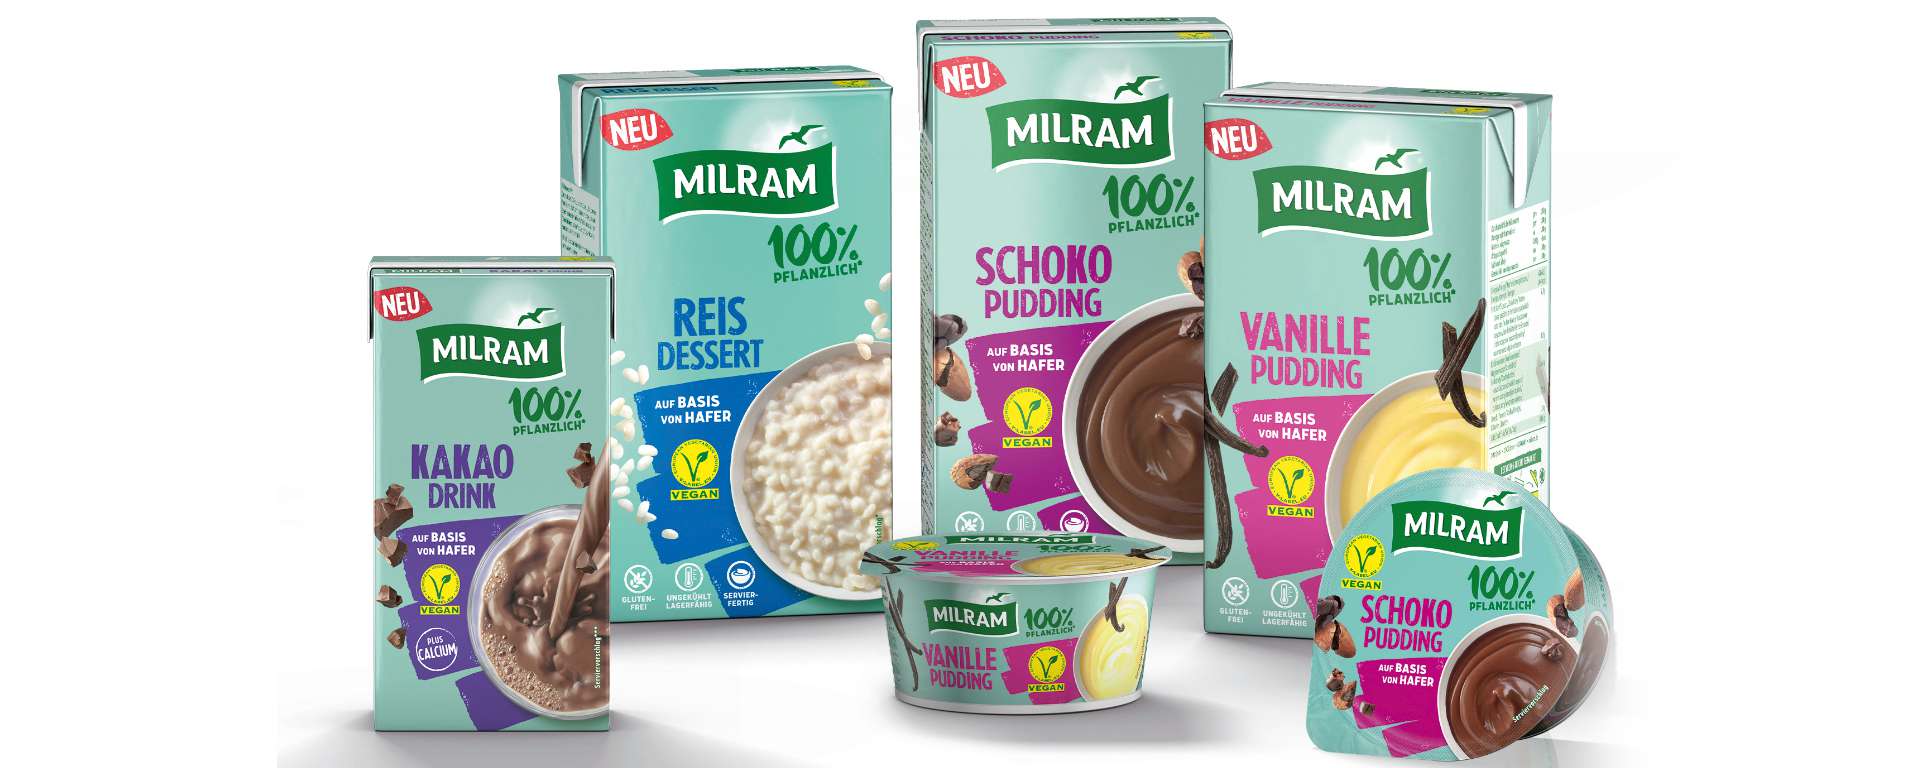 DMK Group introduces vegan products with MILRAM